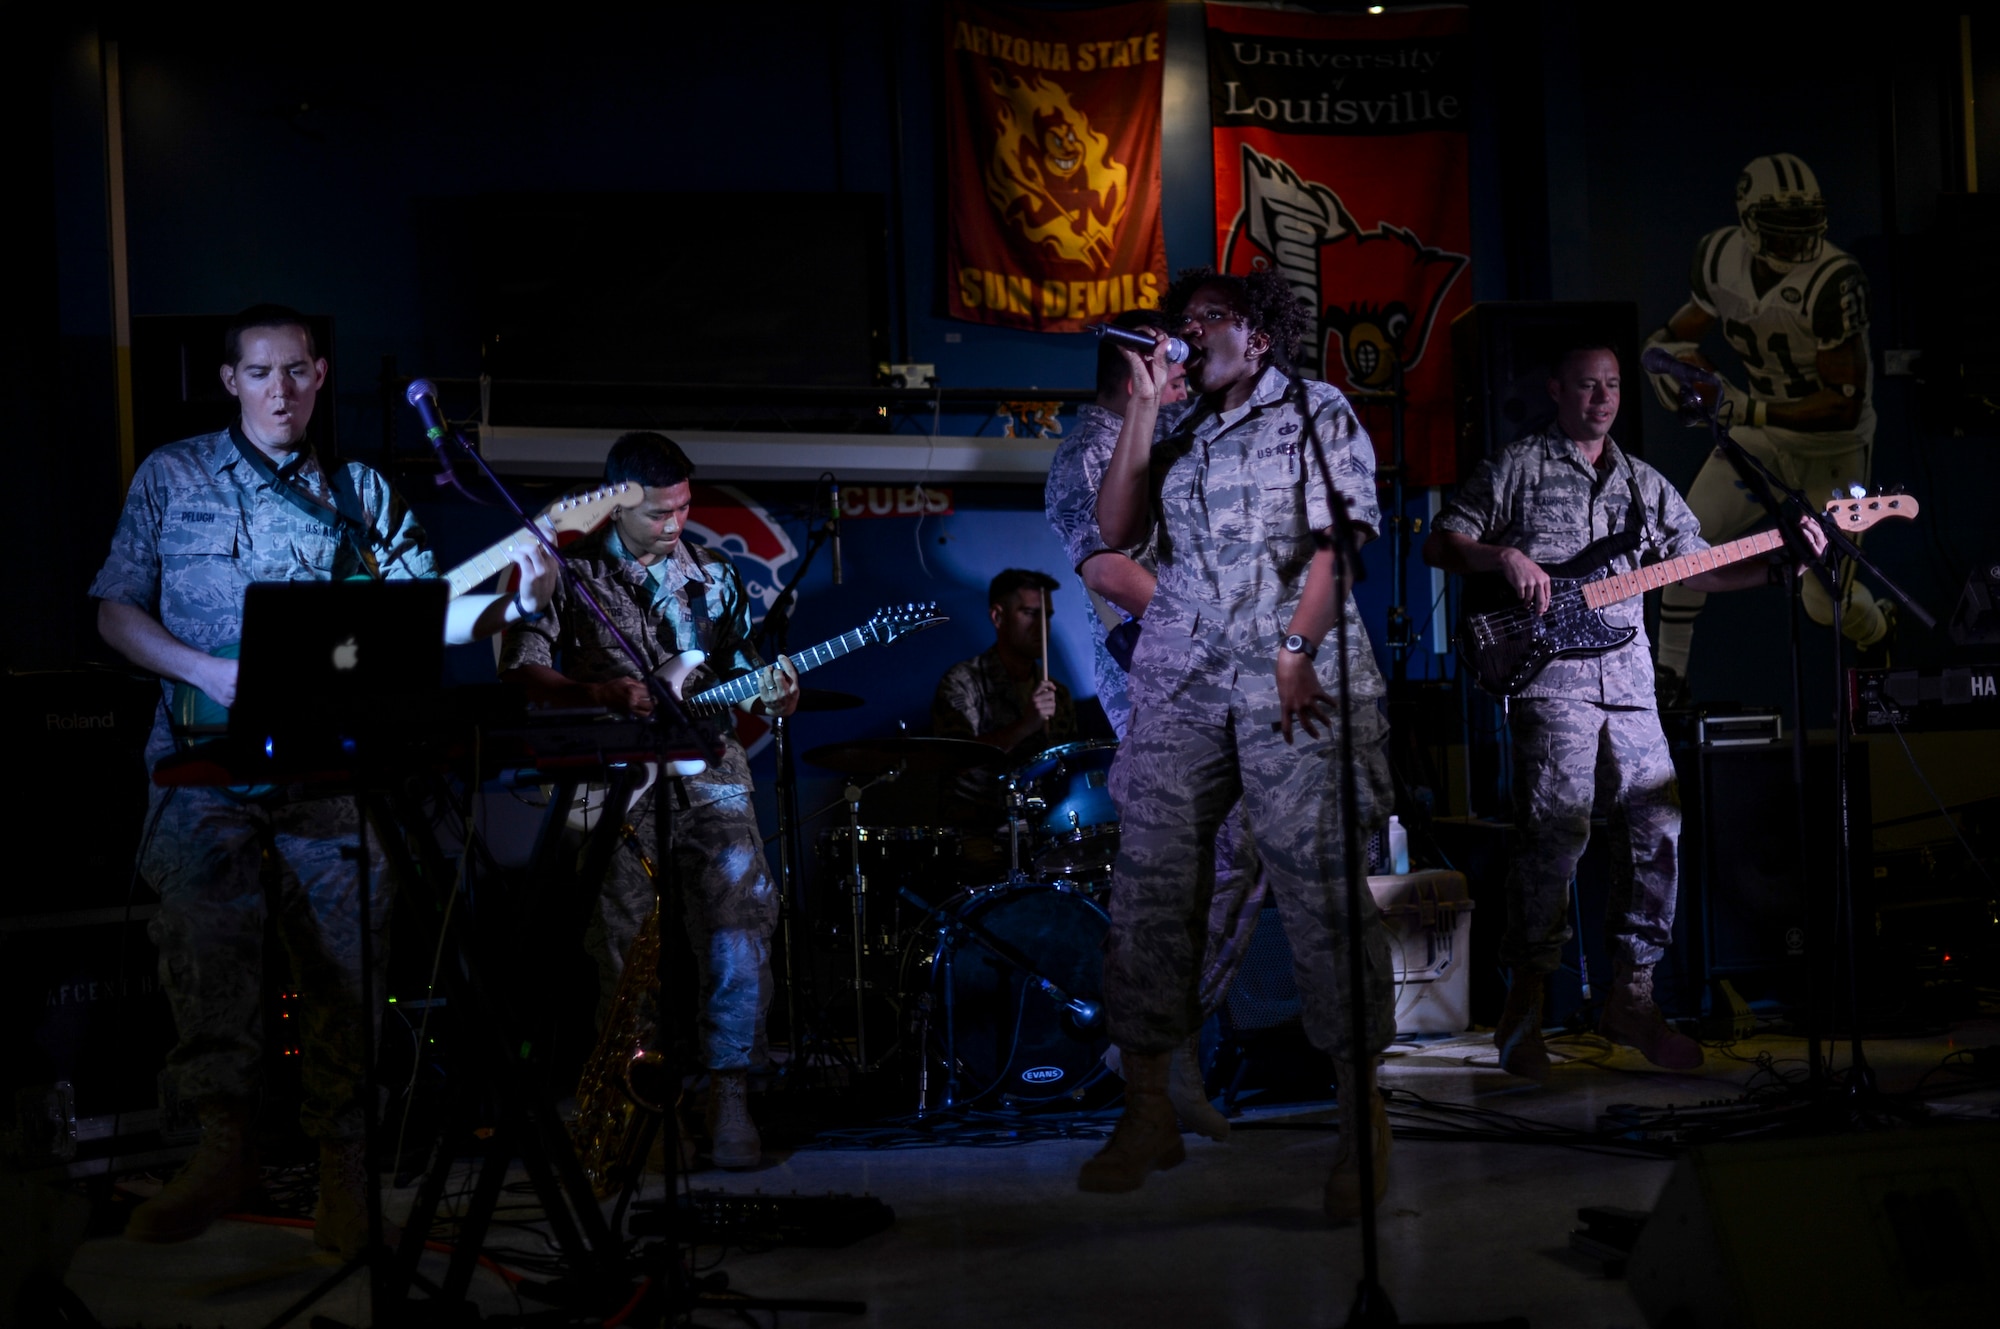 U.S. Air Force Central Command’s band, Hypersonic, performs for members of the 386th Air Expeditionary Wing May 3, 2014, in Southwest Asia. The band spent four days touring the region, performing for deployed troops to boost morale and reaching out to host nation communities. The band is deployed from Yokota Air Base, Japan. (U.S. Air Force photo/Staff Sgt. Jeremy Bowcock)